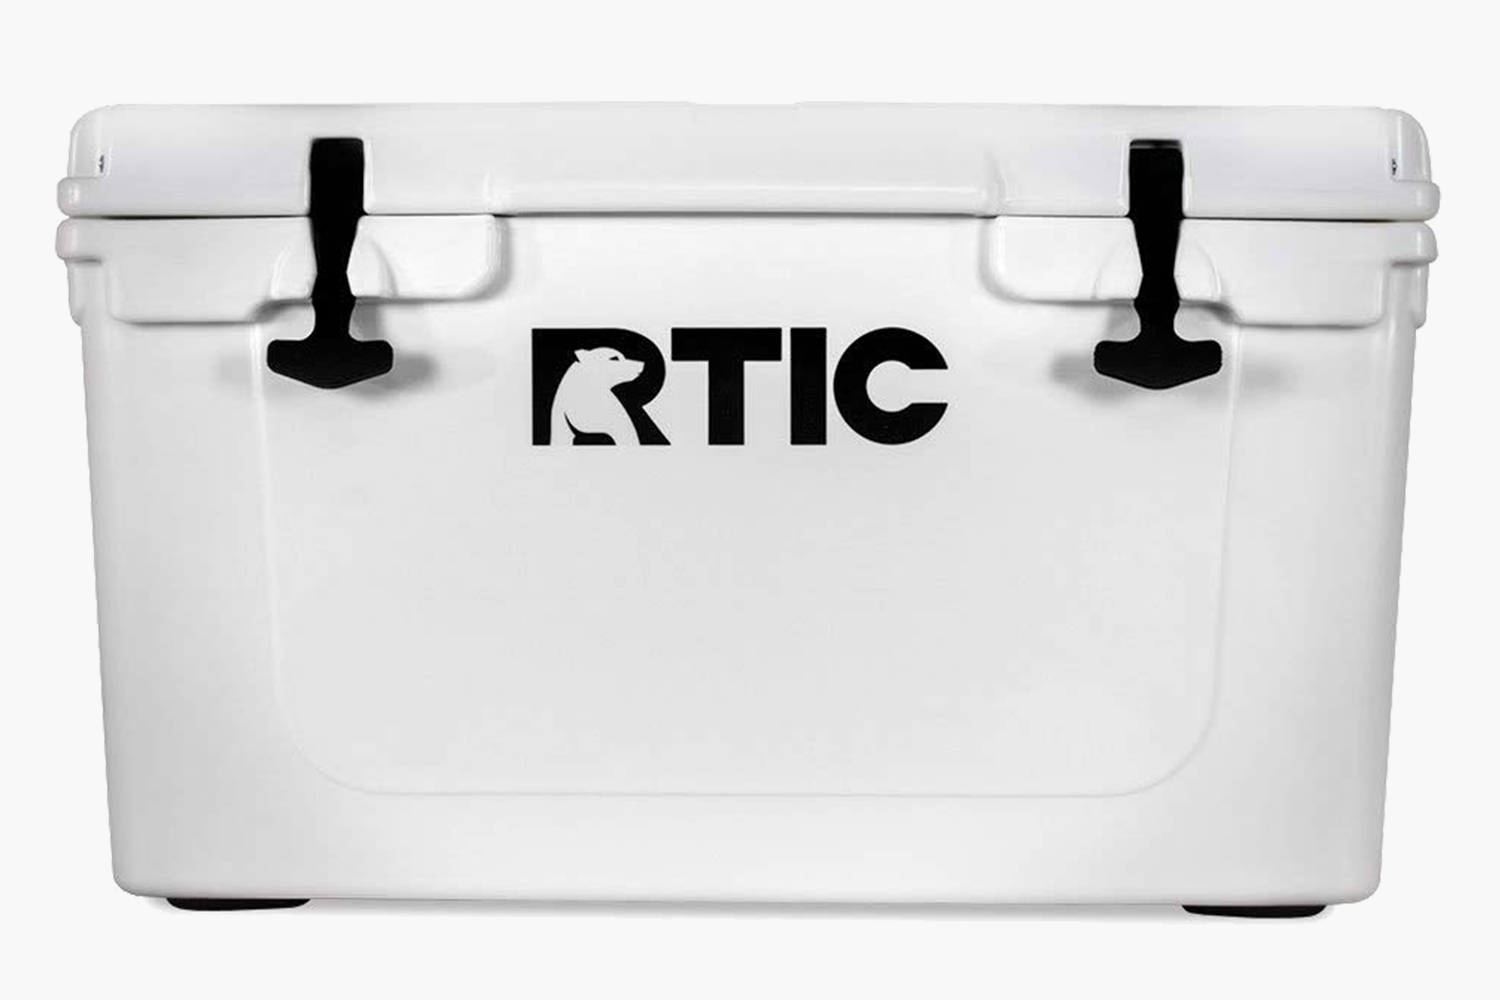 One of the hard-side RTIC coolers discounted in the Amazon sale. (Credit: Amazon)